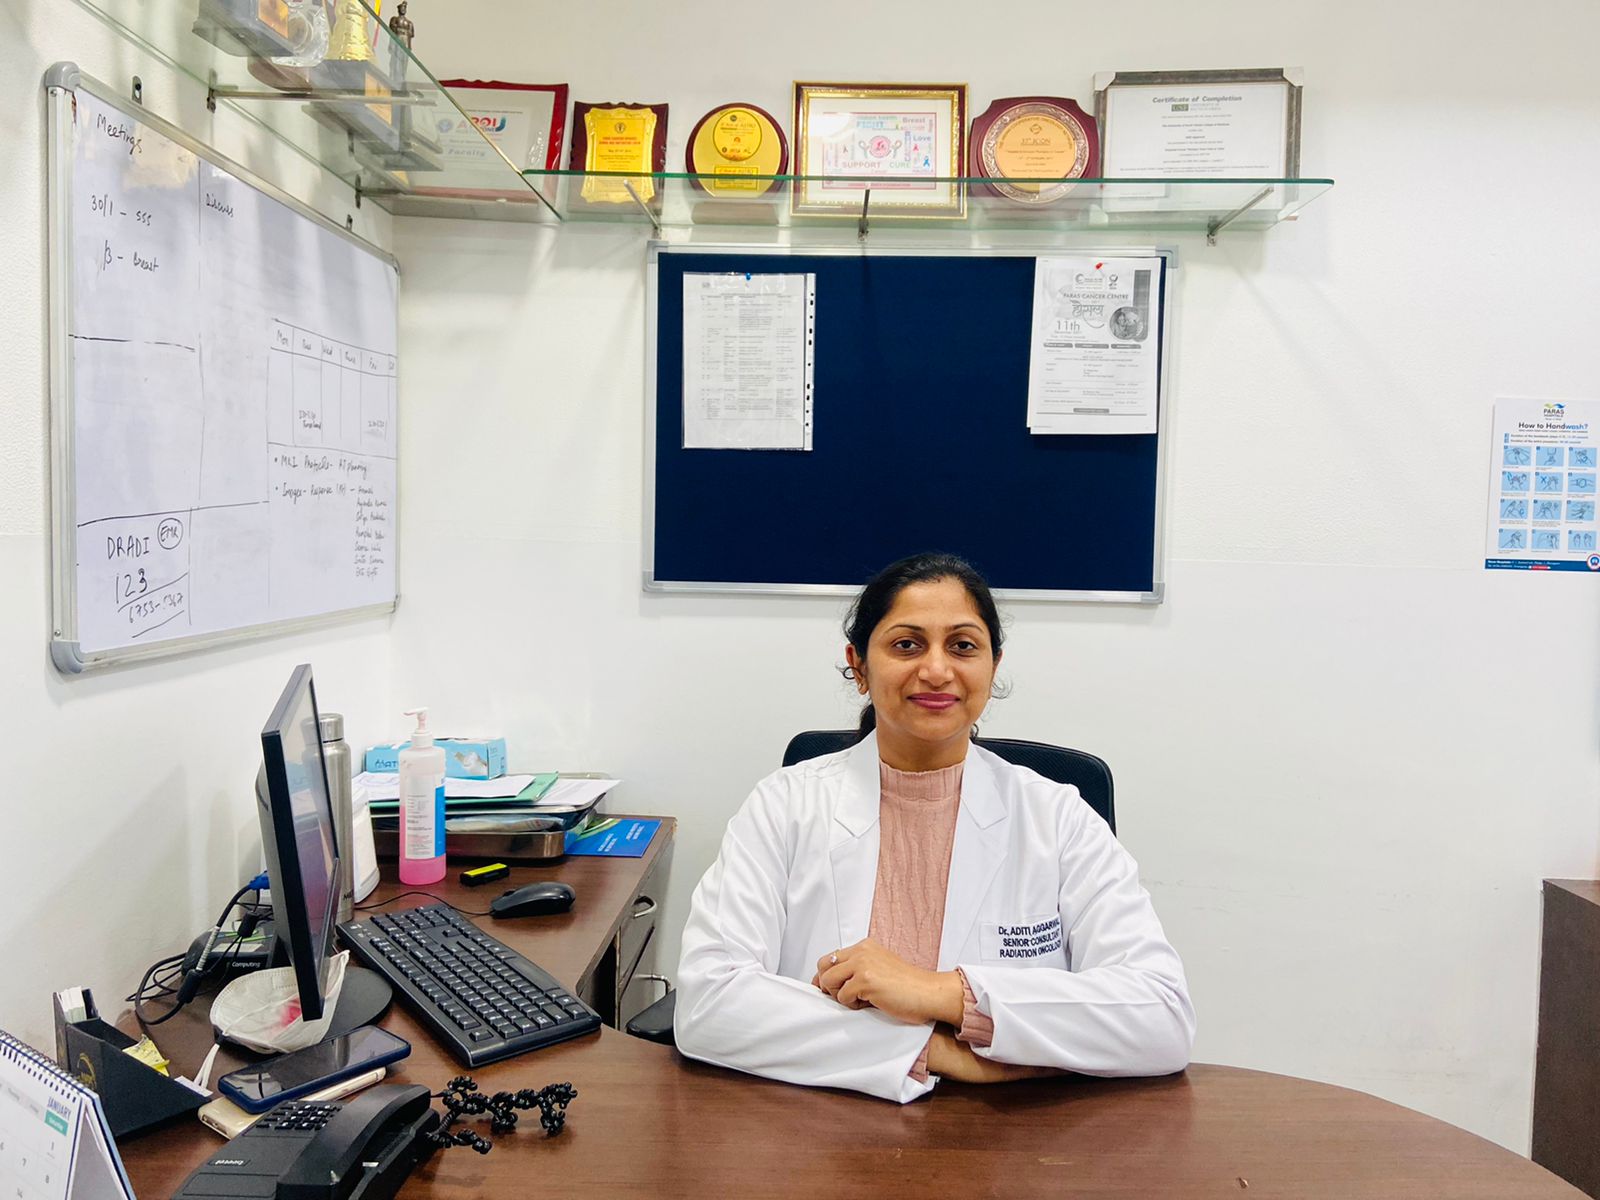 About Dr. Aditi Aggarwal